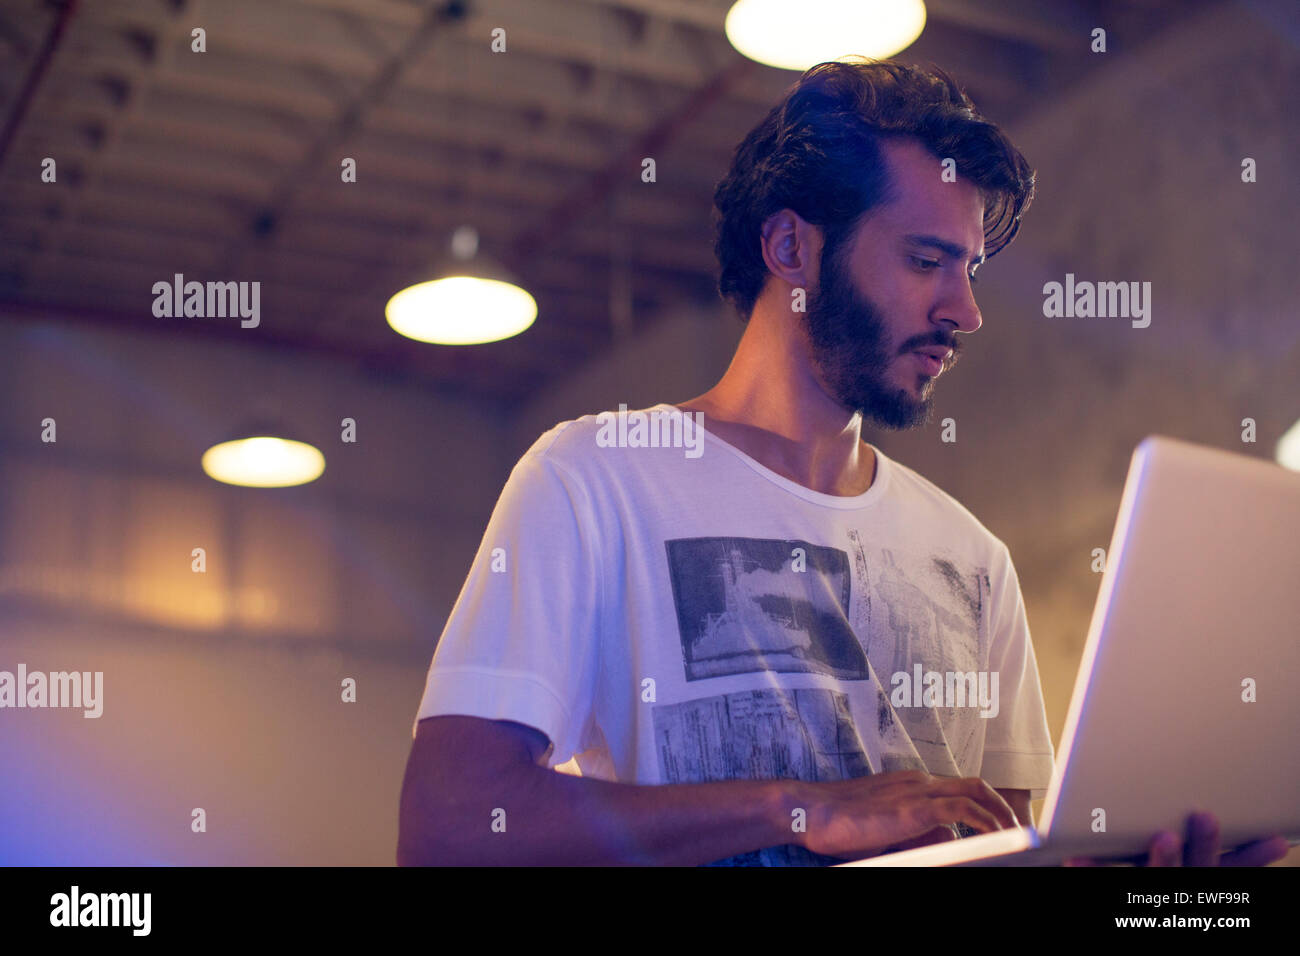 Businessman using laptop in office Banque D'Images